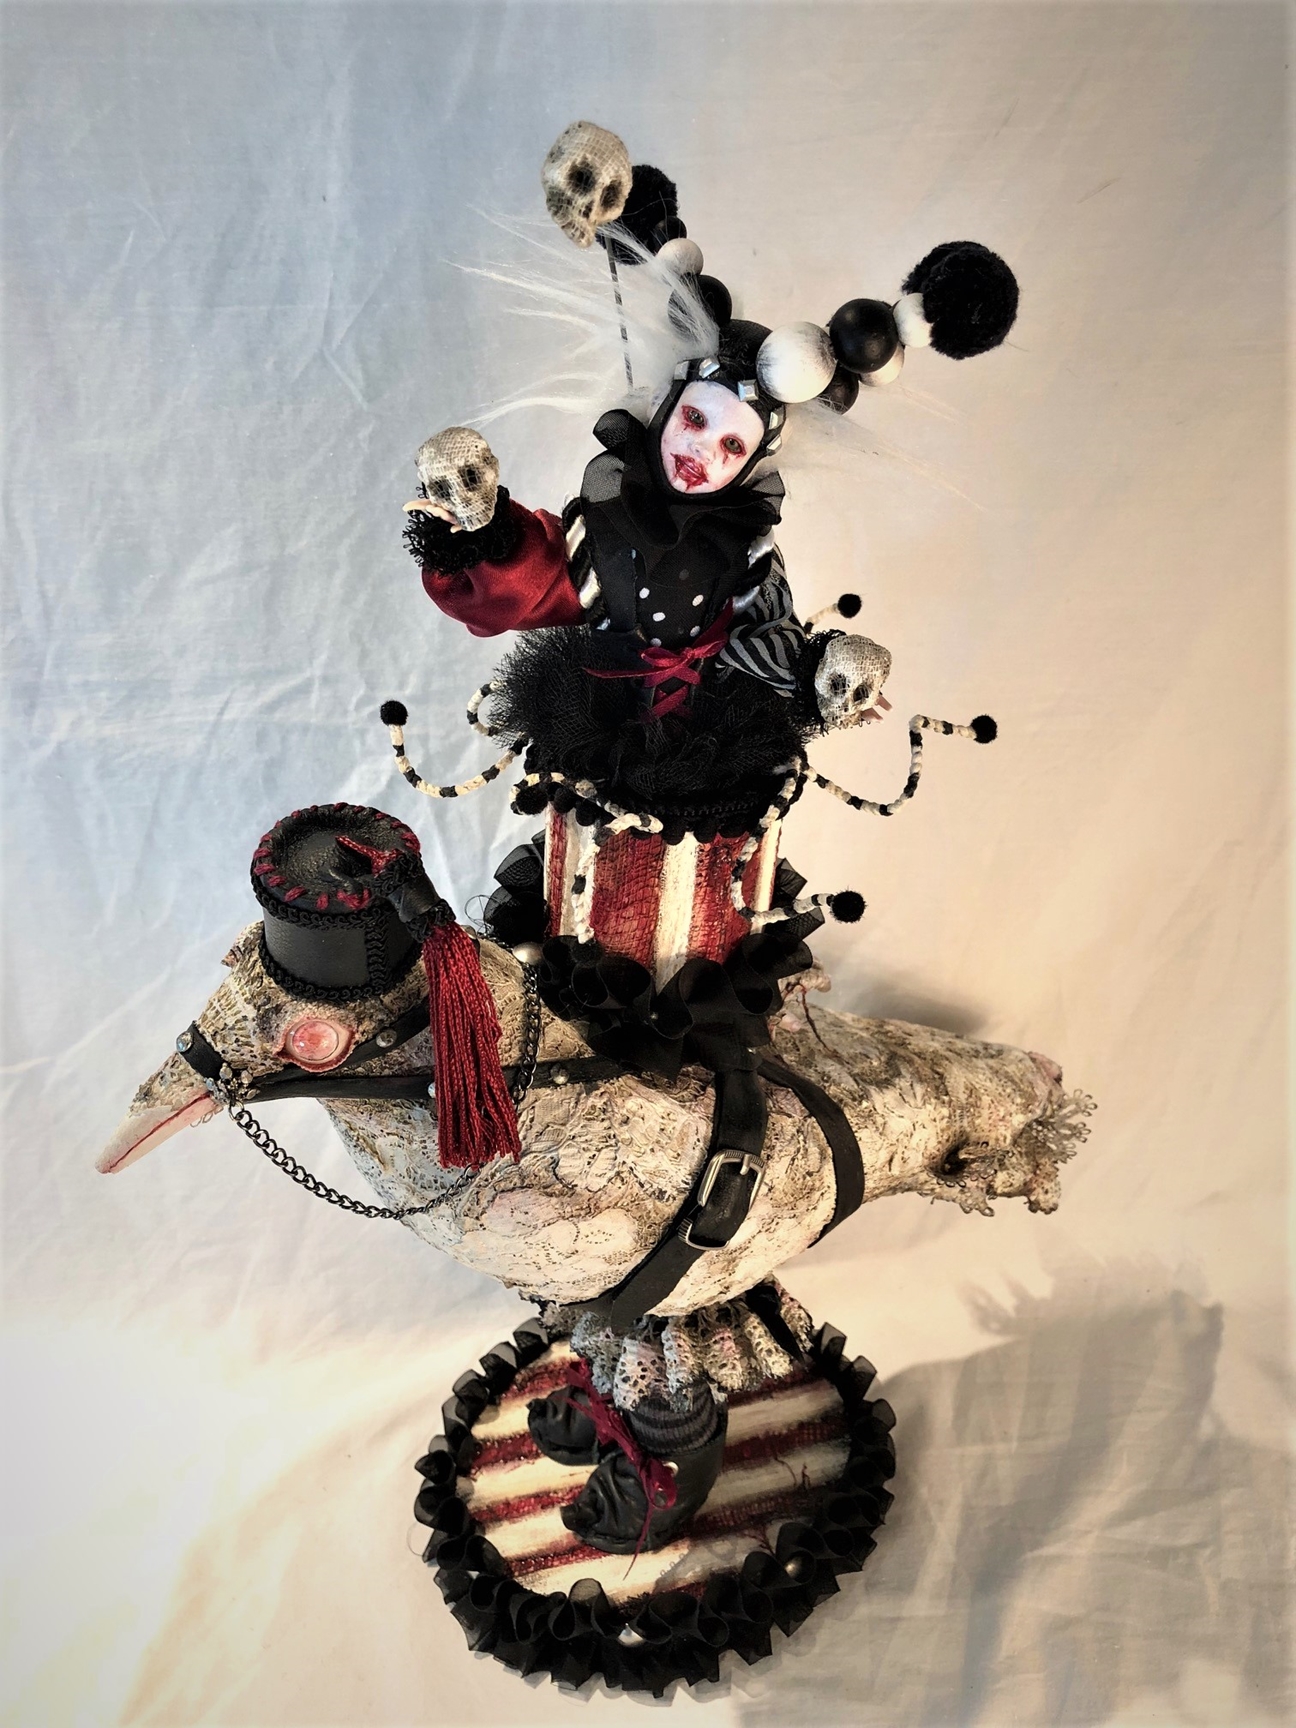 mixed media miniature gothic costumed circus performer juggles skulls and rides a lace-covered albino crow toy wearing striped stockings, boots and a fez standing on a painted wooden platform